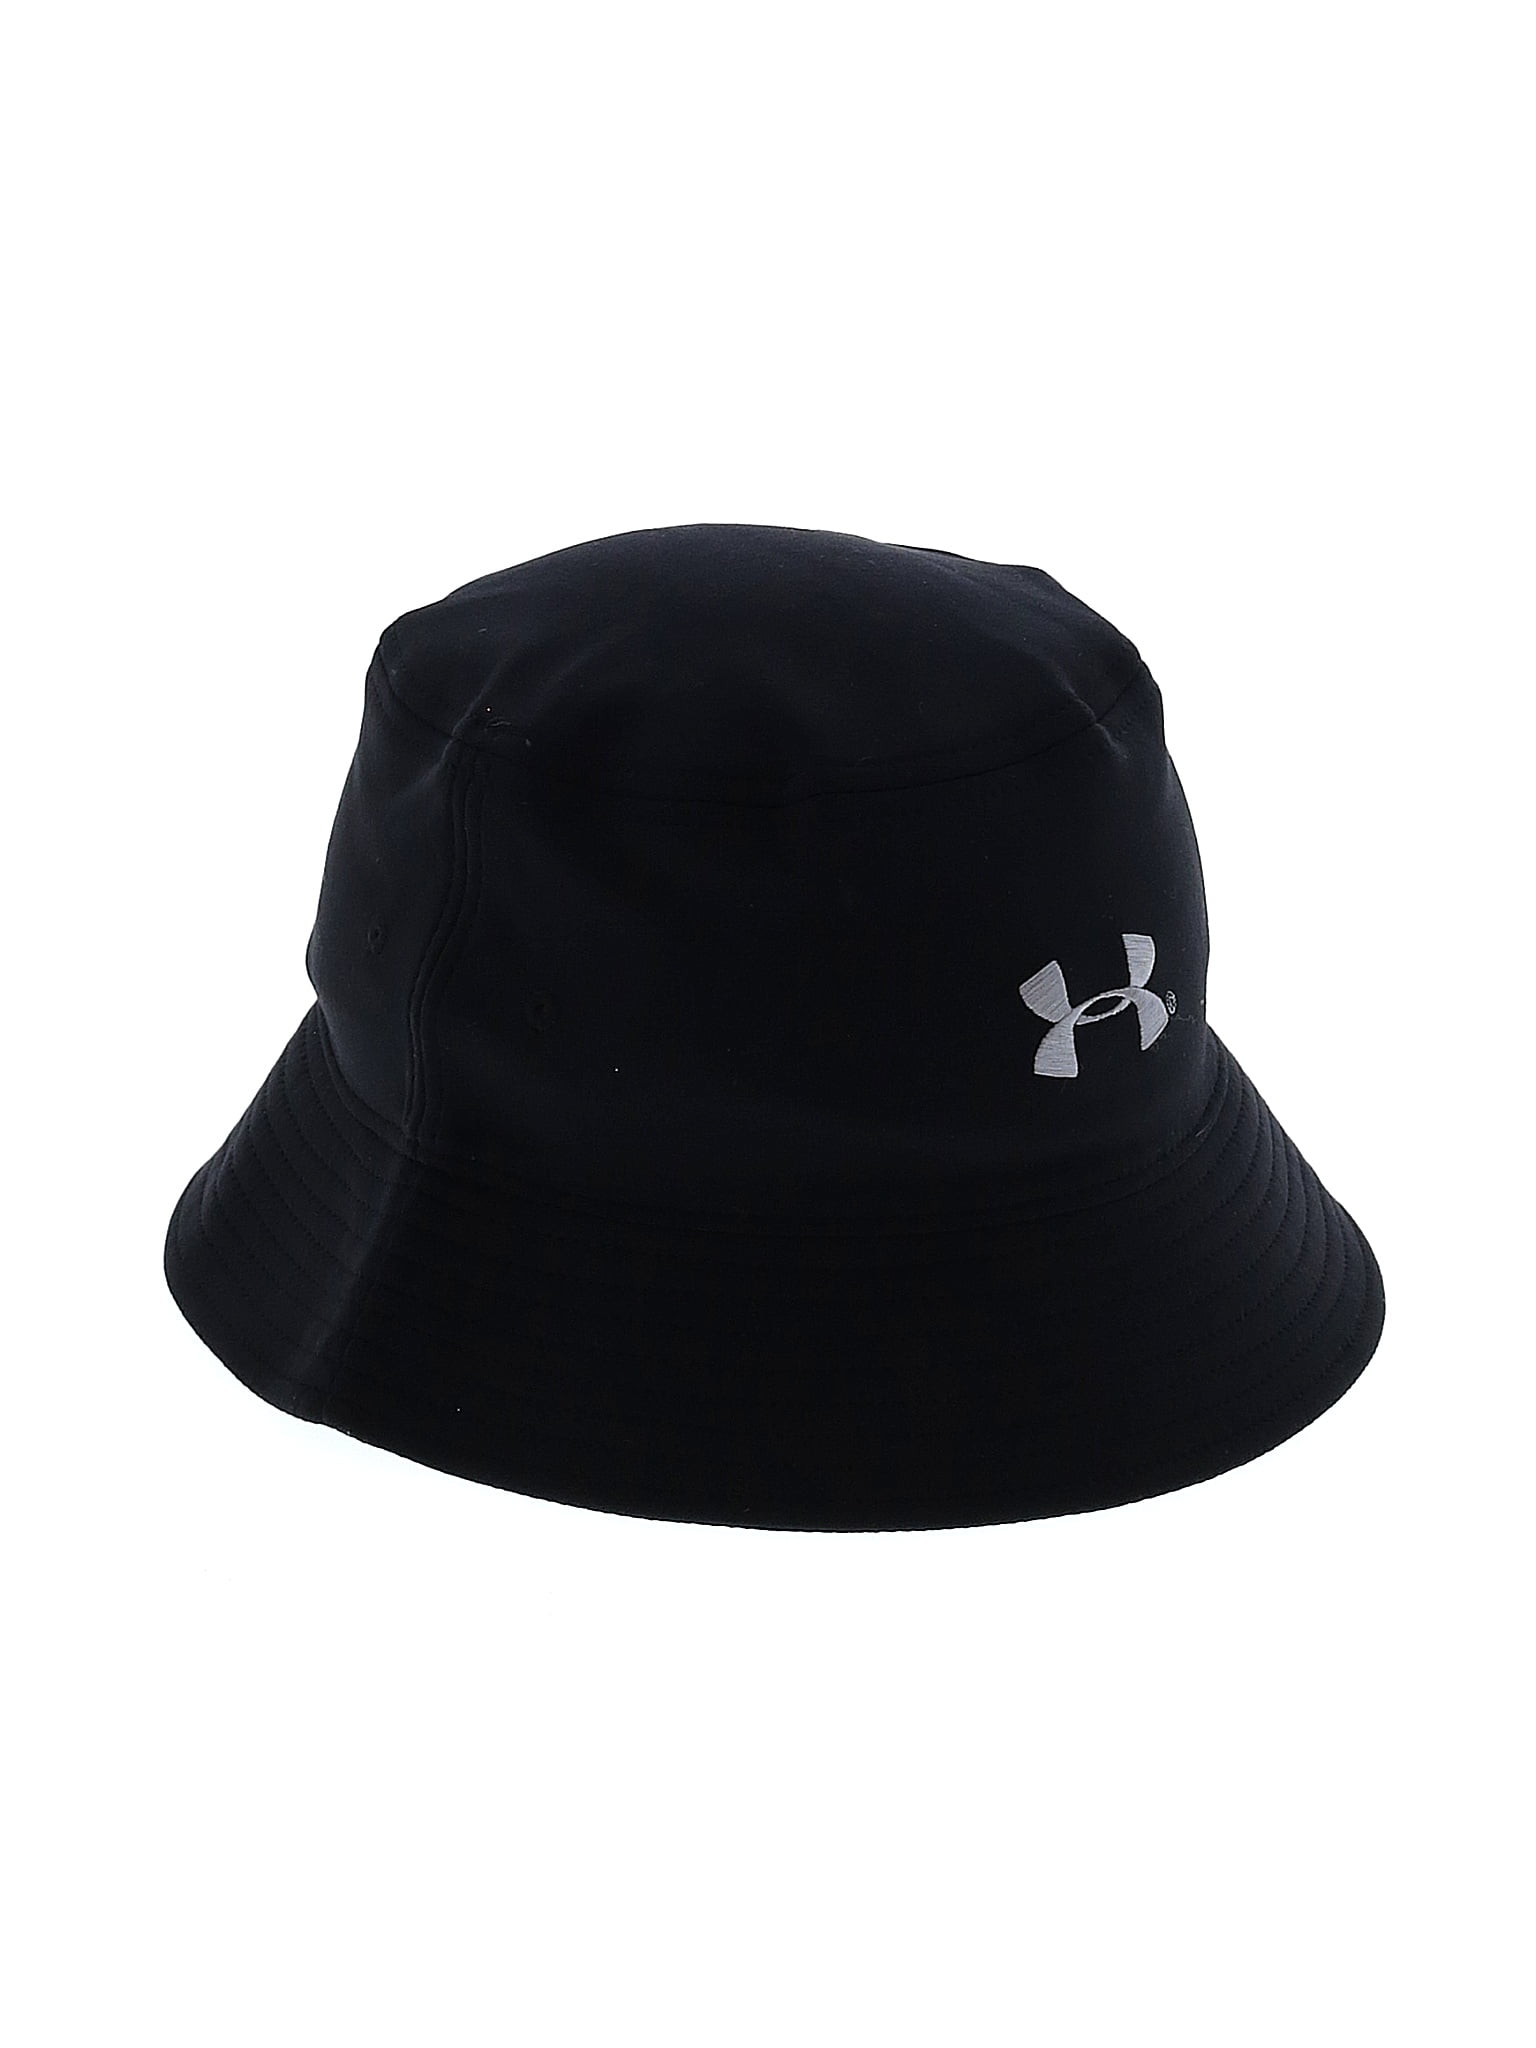 Under Armour Black Sun Hat One Size - 56% off